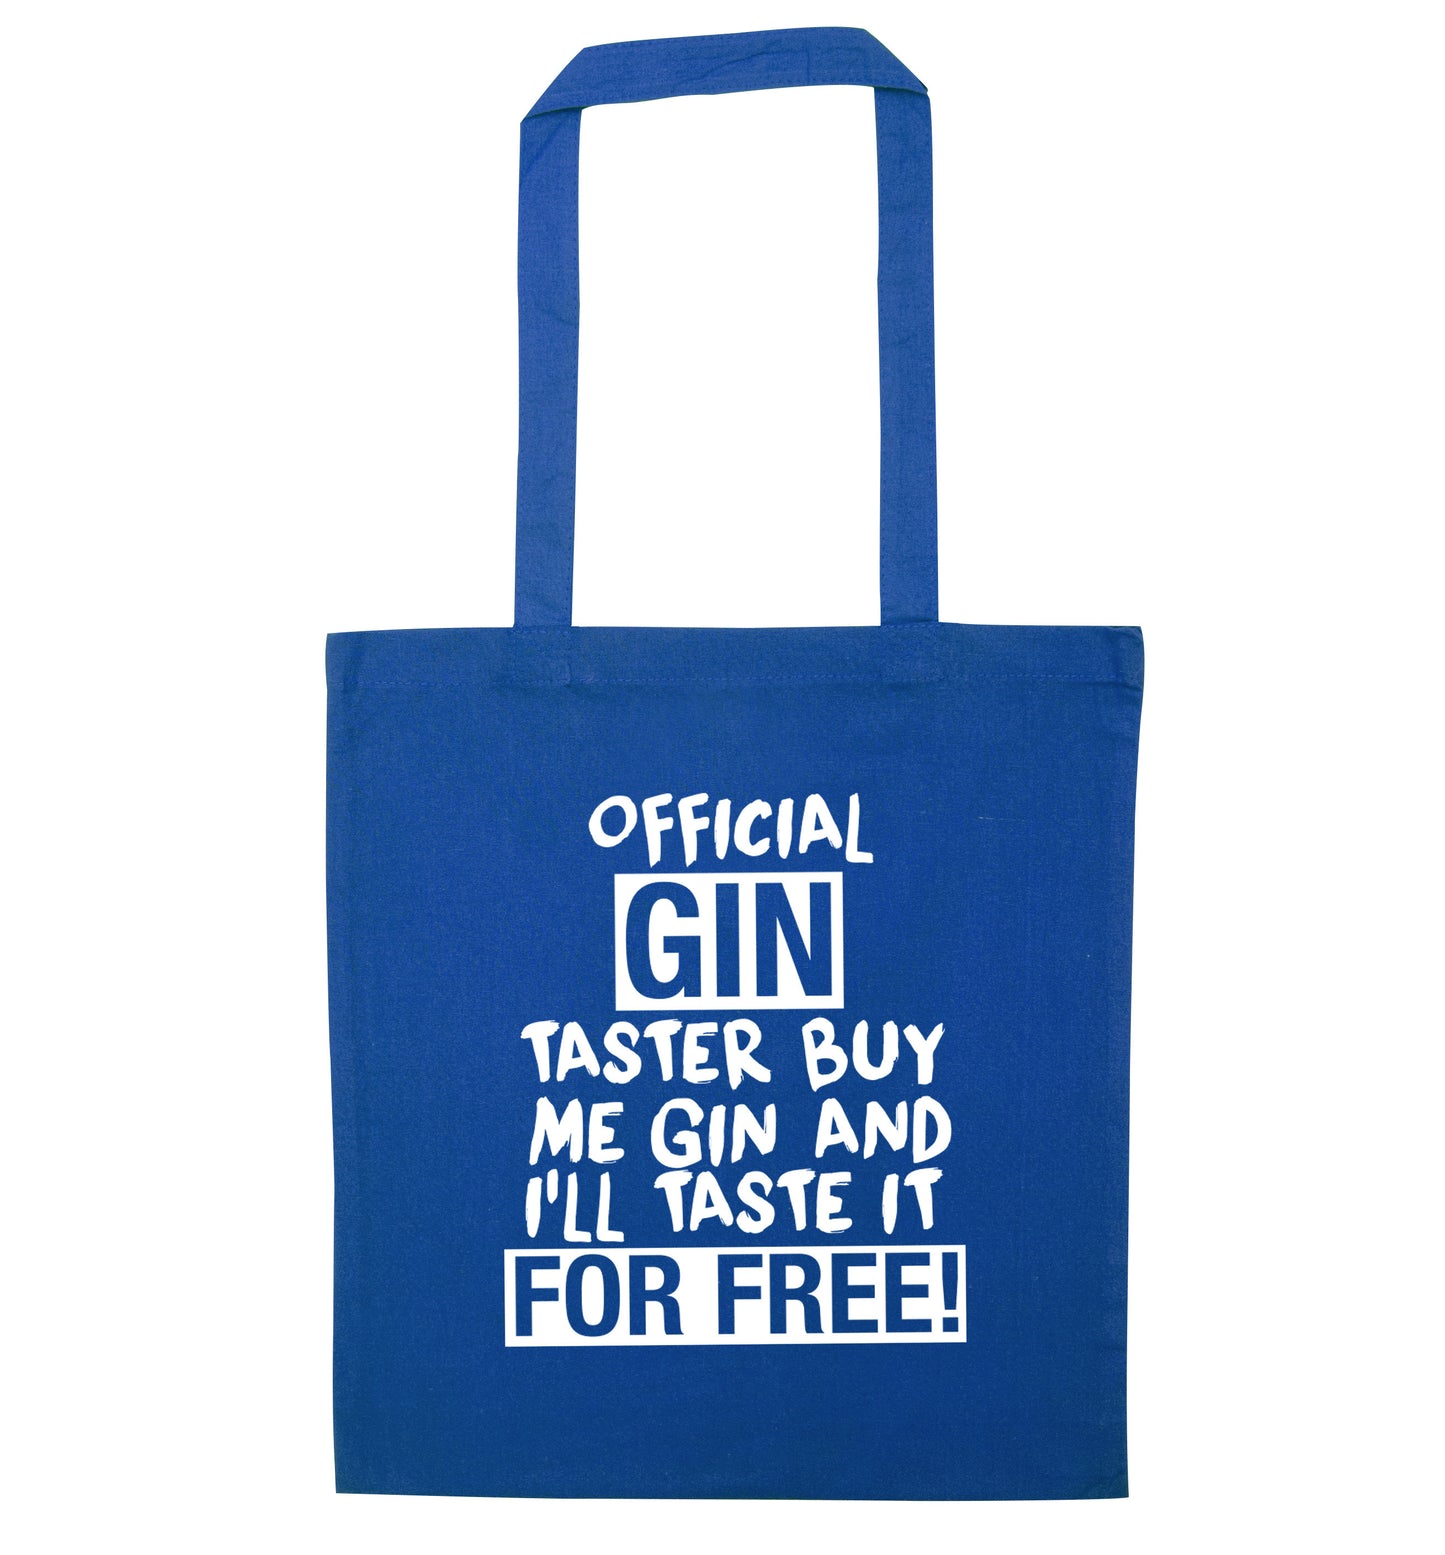 Official gin taster buy me gin and I'll taste it for free blue tote bag